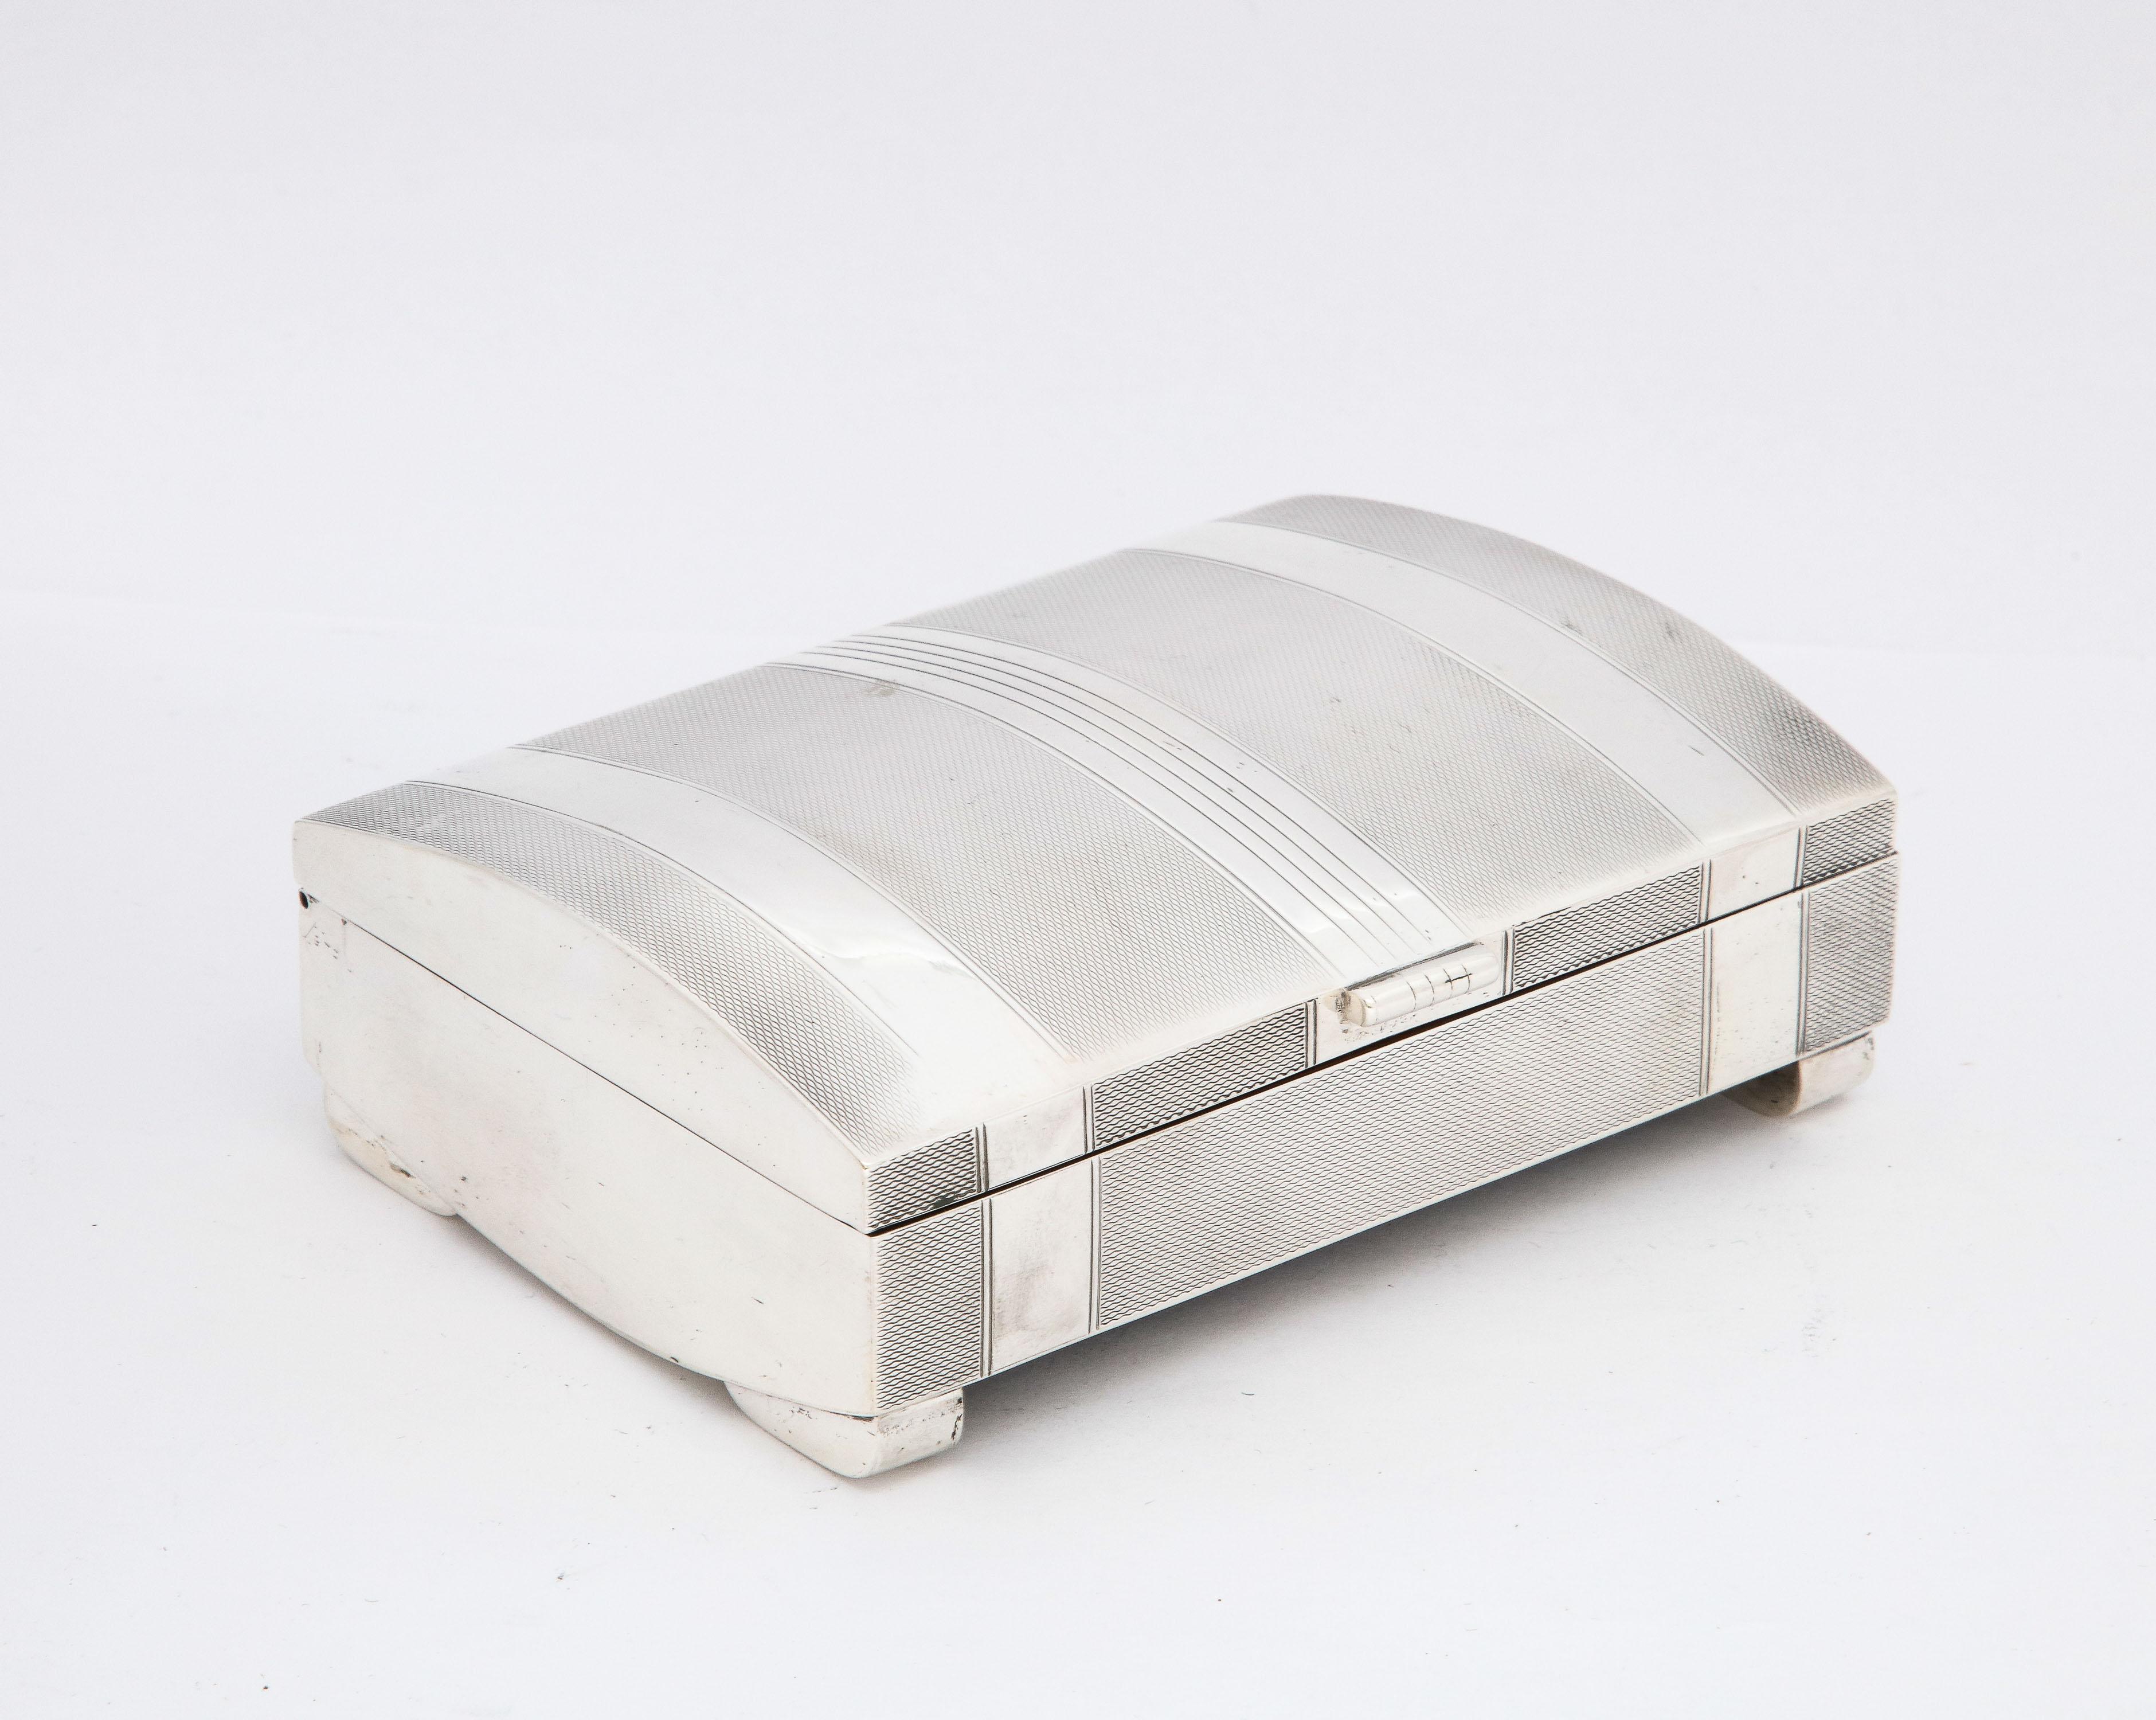 Unusual, rare, Art Deco Period, footed sterling silver table box with rounded, hinged lid, Birmingham, England, year-hallmarked for 1938, Hassett and Harper Ltd. - makers. Underside of box is all sterling silver; feet are elongated and rounded in